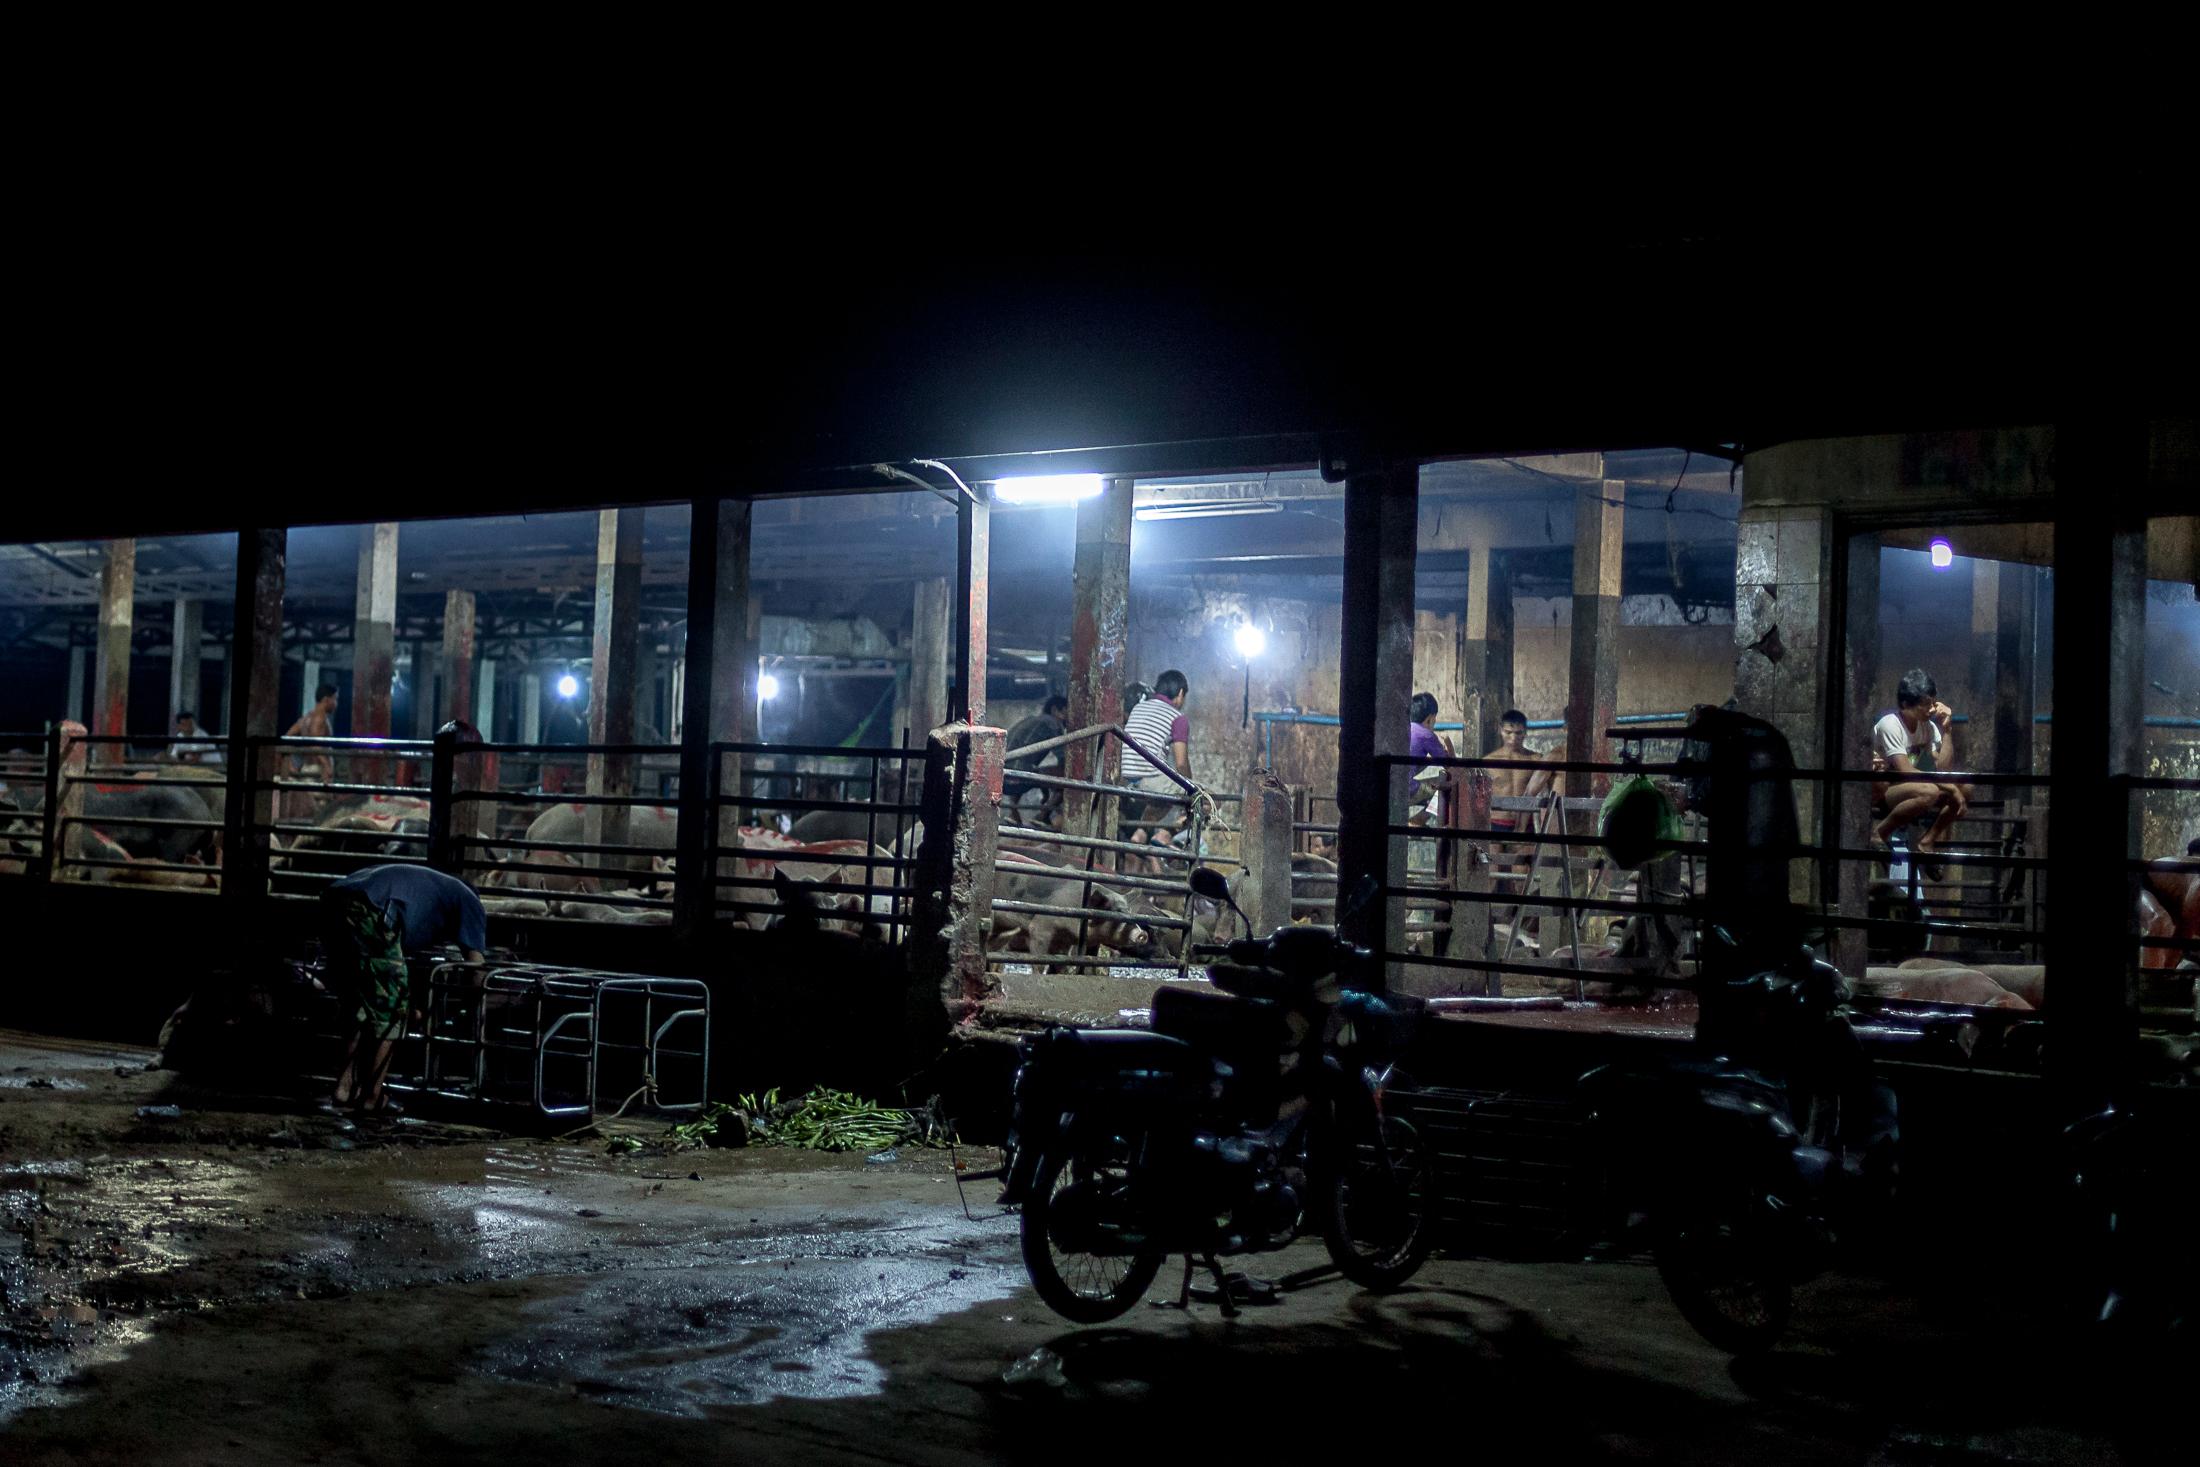 Inside a Cambodian Slaughterhouse - SIEM REAP, CAMBODIA - FEBRUARY 22: A group of young...